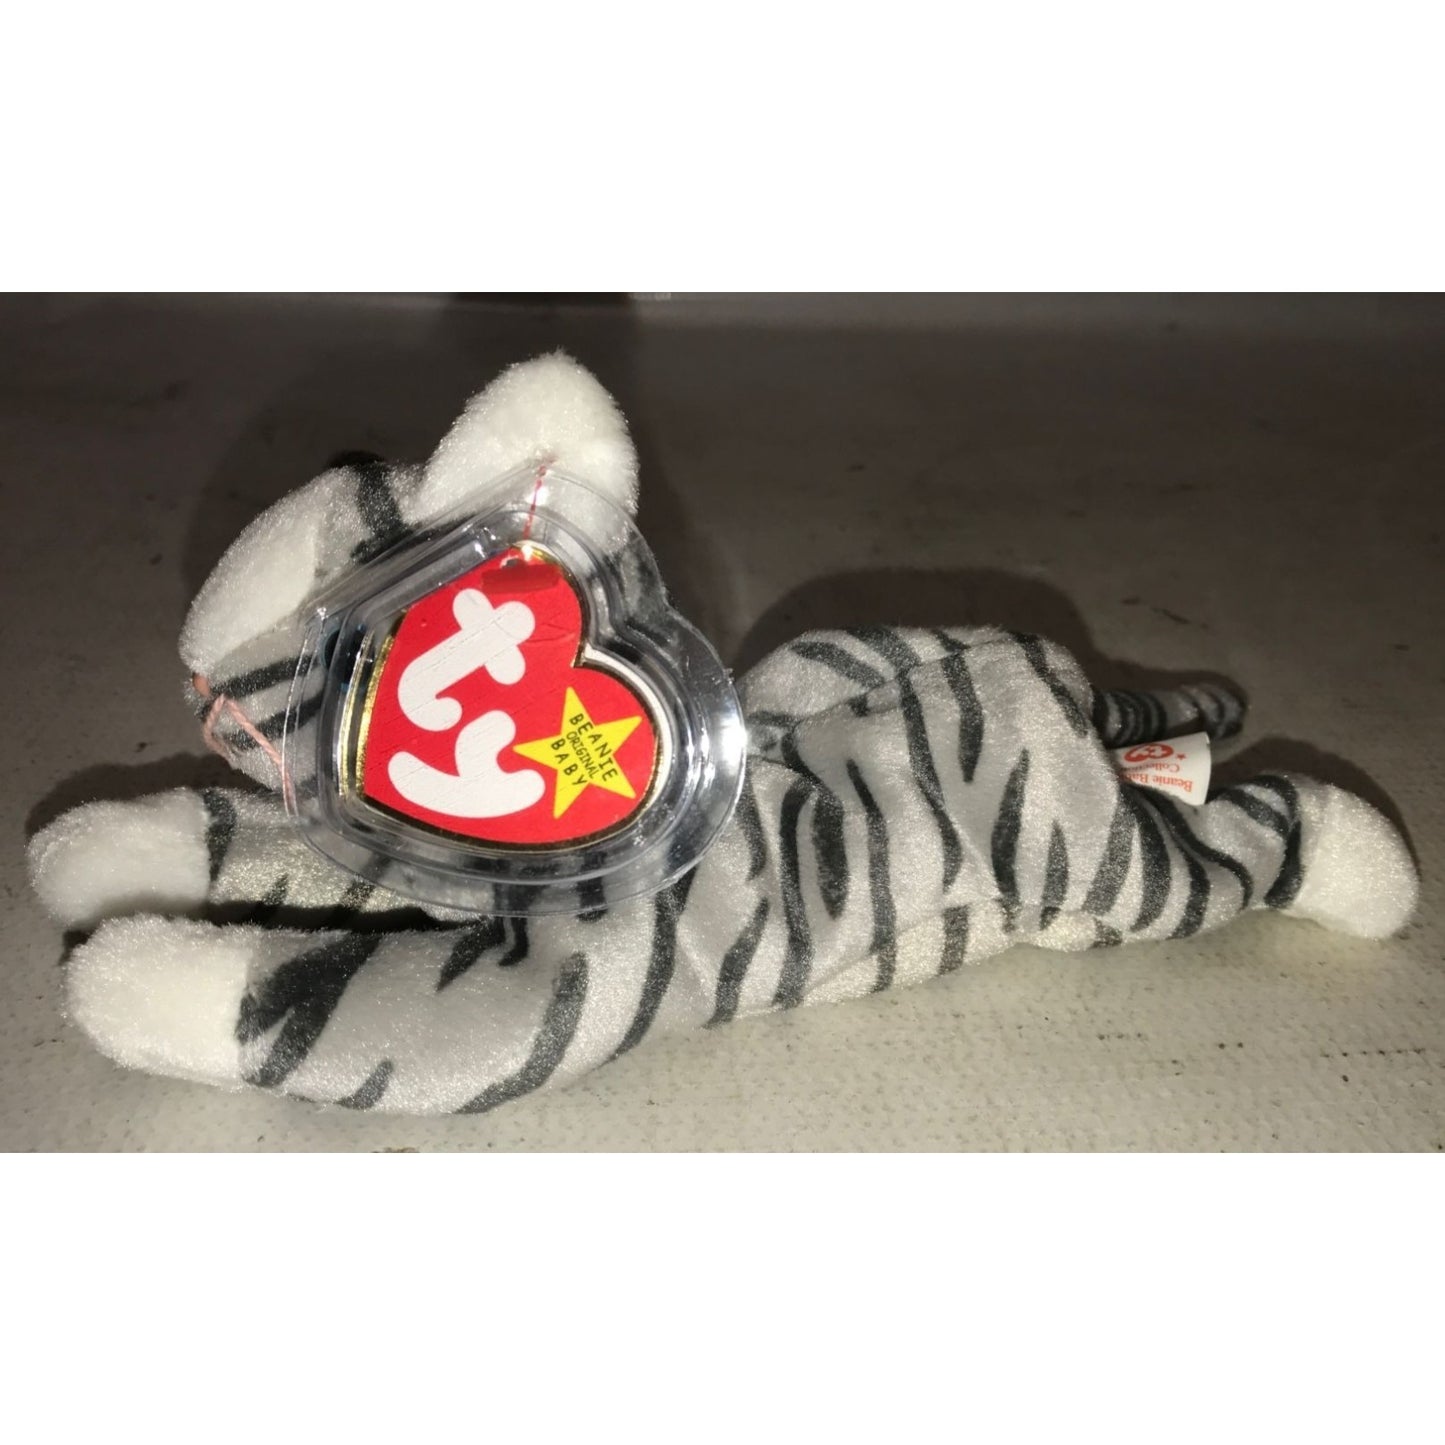 Vintage 1997 TY Beanie Baby Prance the Cat w/ tags